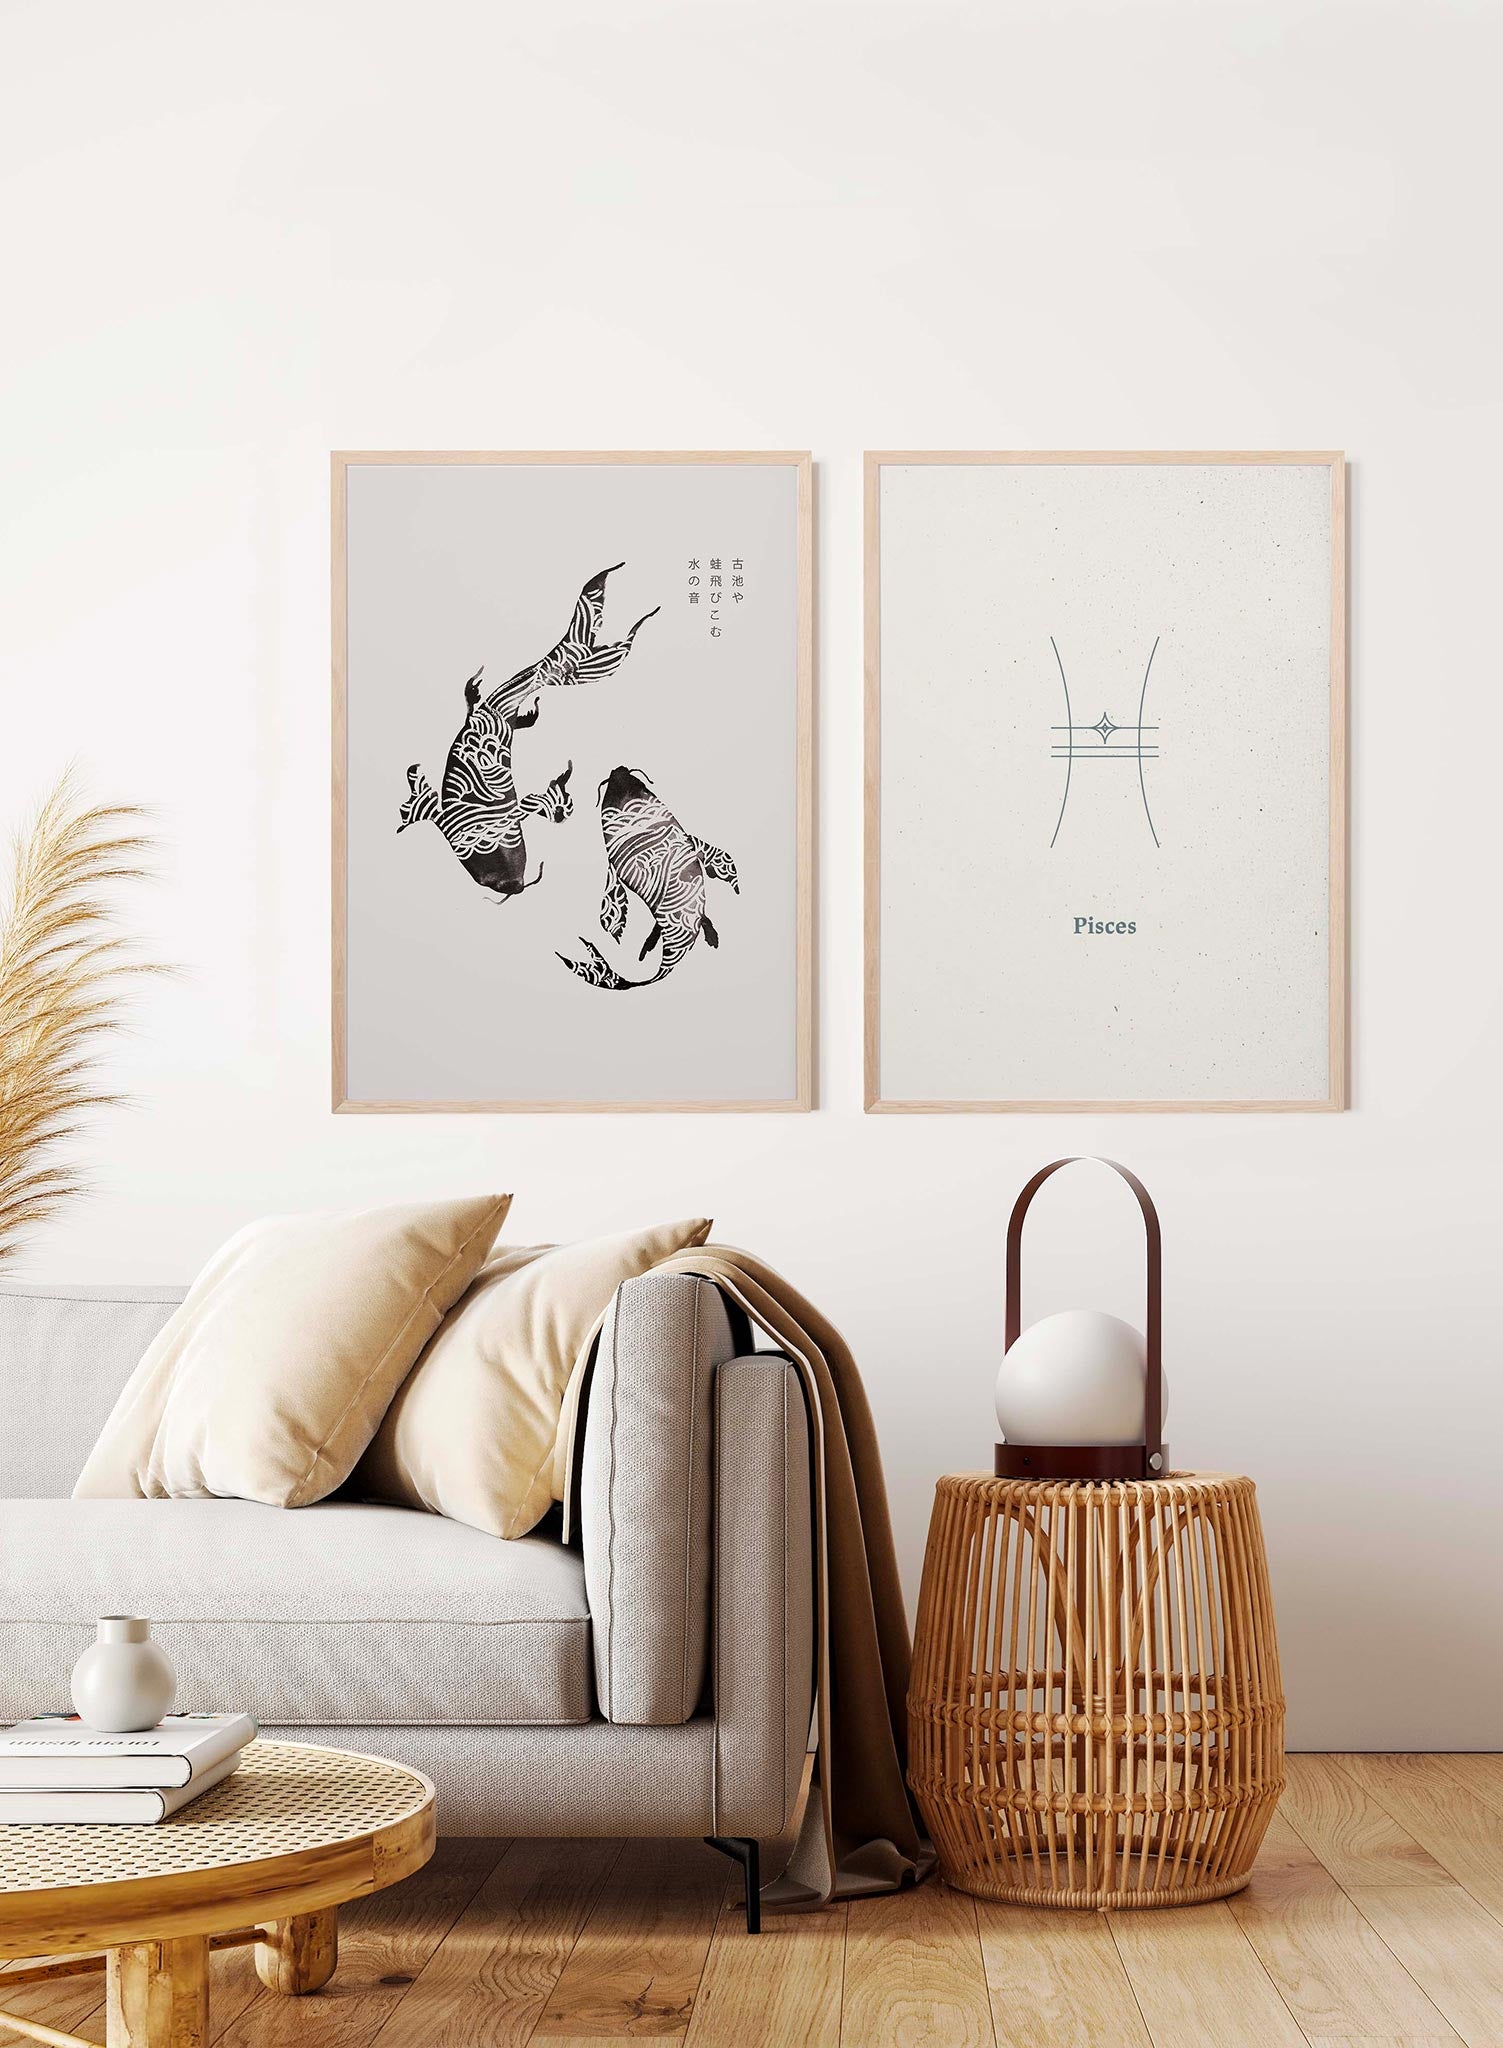 Koi and Haiku is a minimalist illustration by Opposite Wall of two striped koi fishes swimming towards each other.